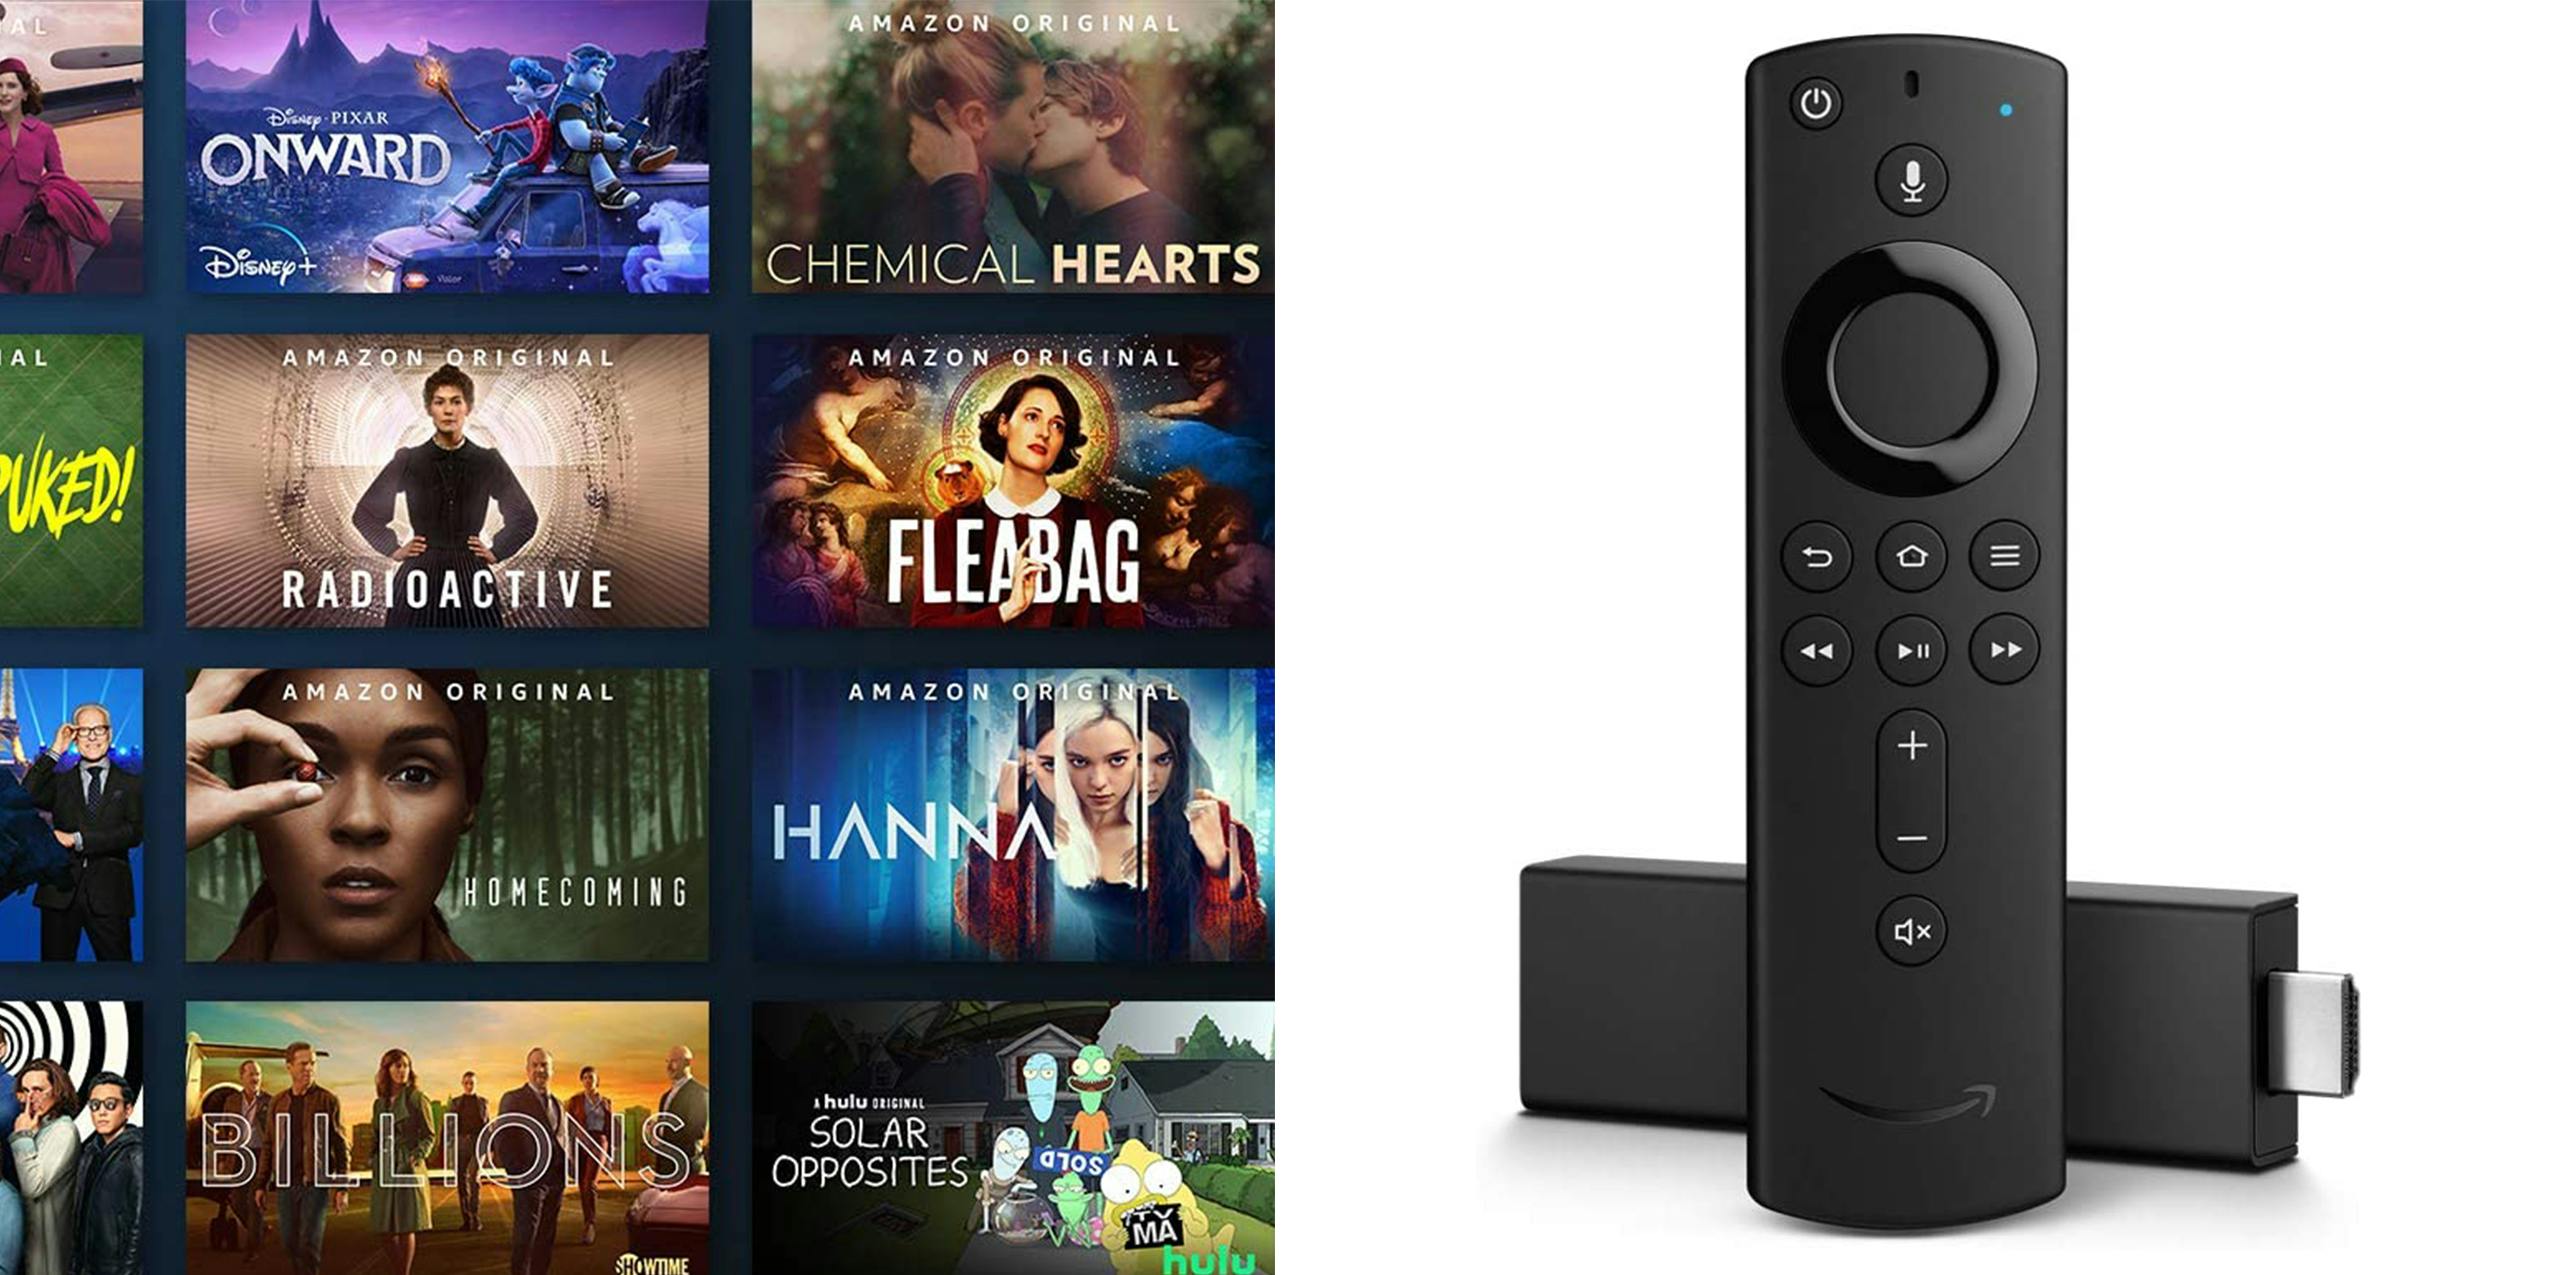 Amazon Fire TV Stick 4K along with a showcase of Prime Video programing.